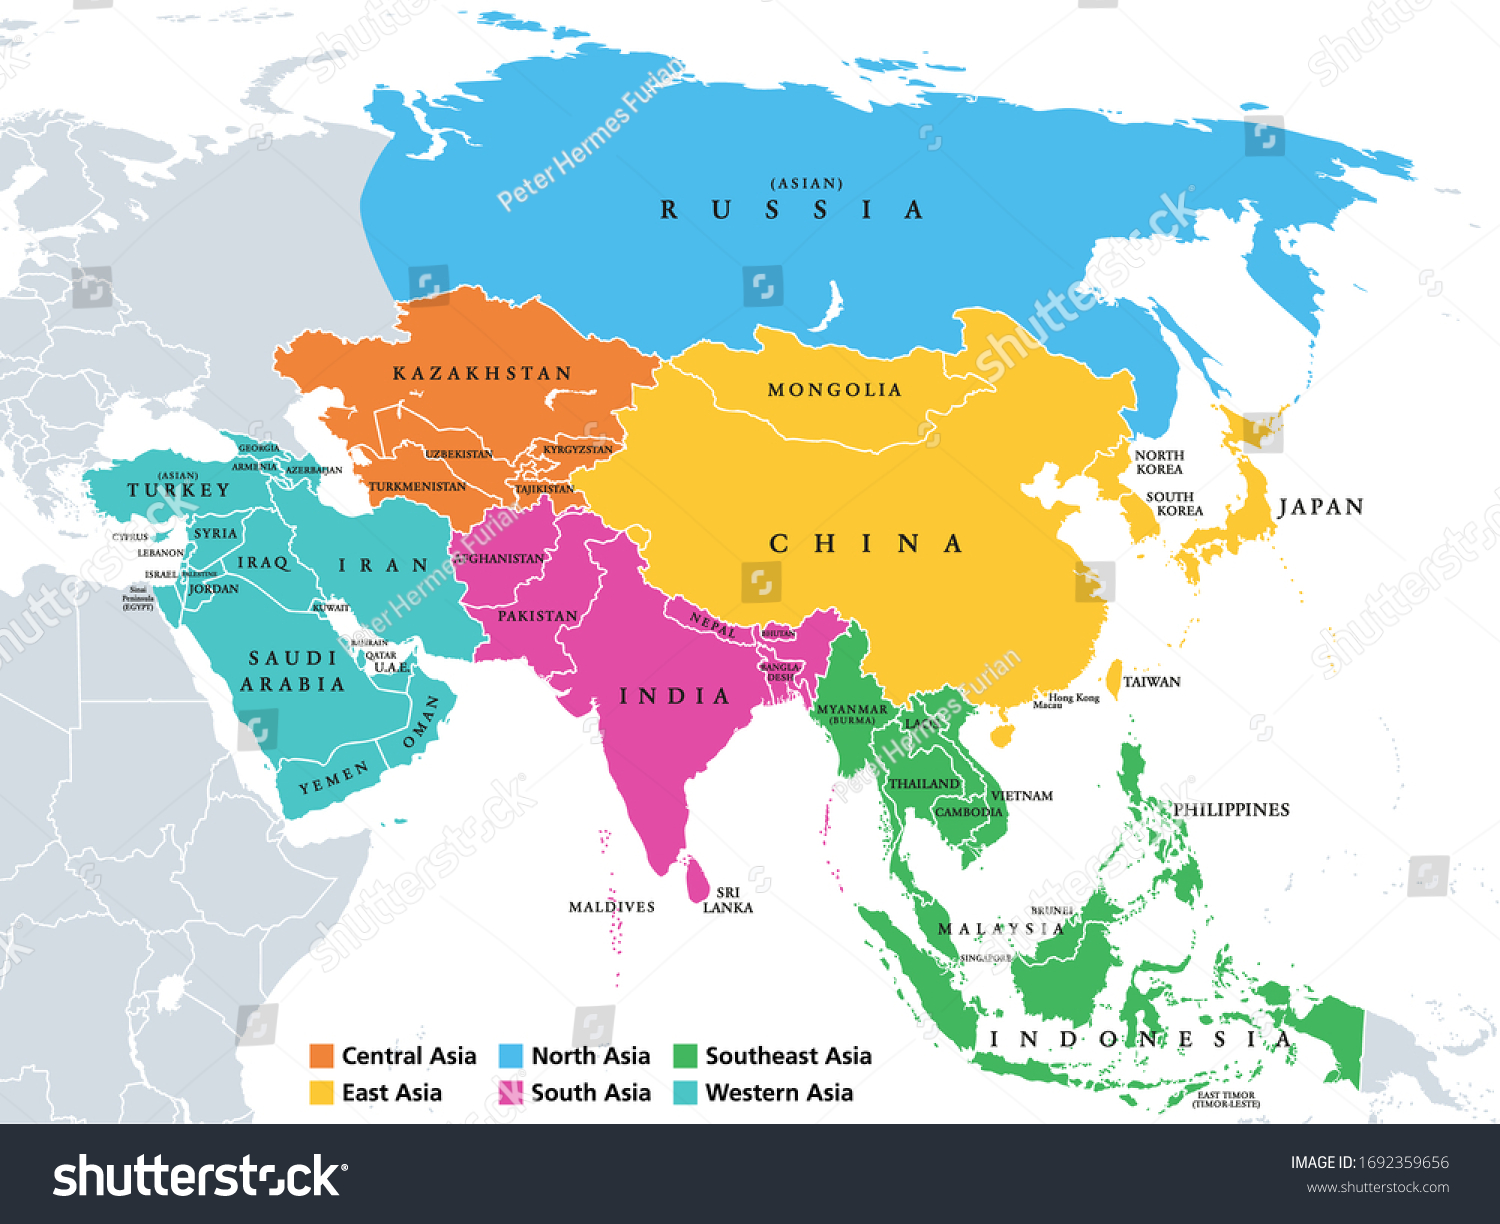 Main Regions Of Asia Political Map With Single Countries Colored ...